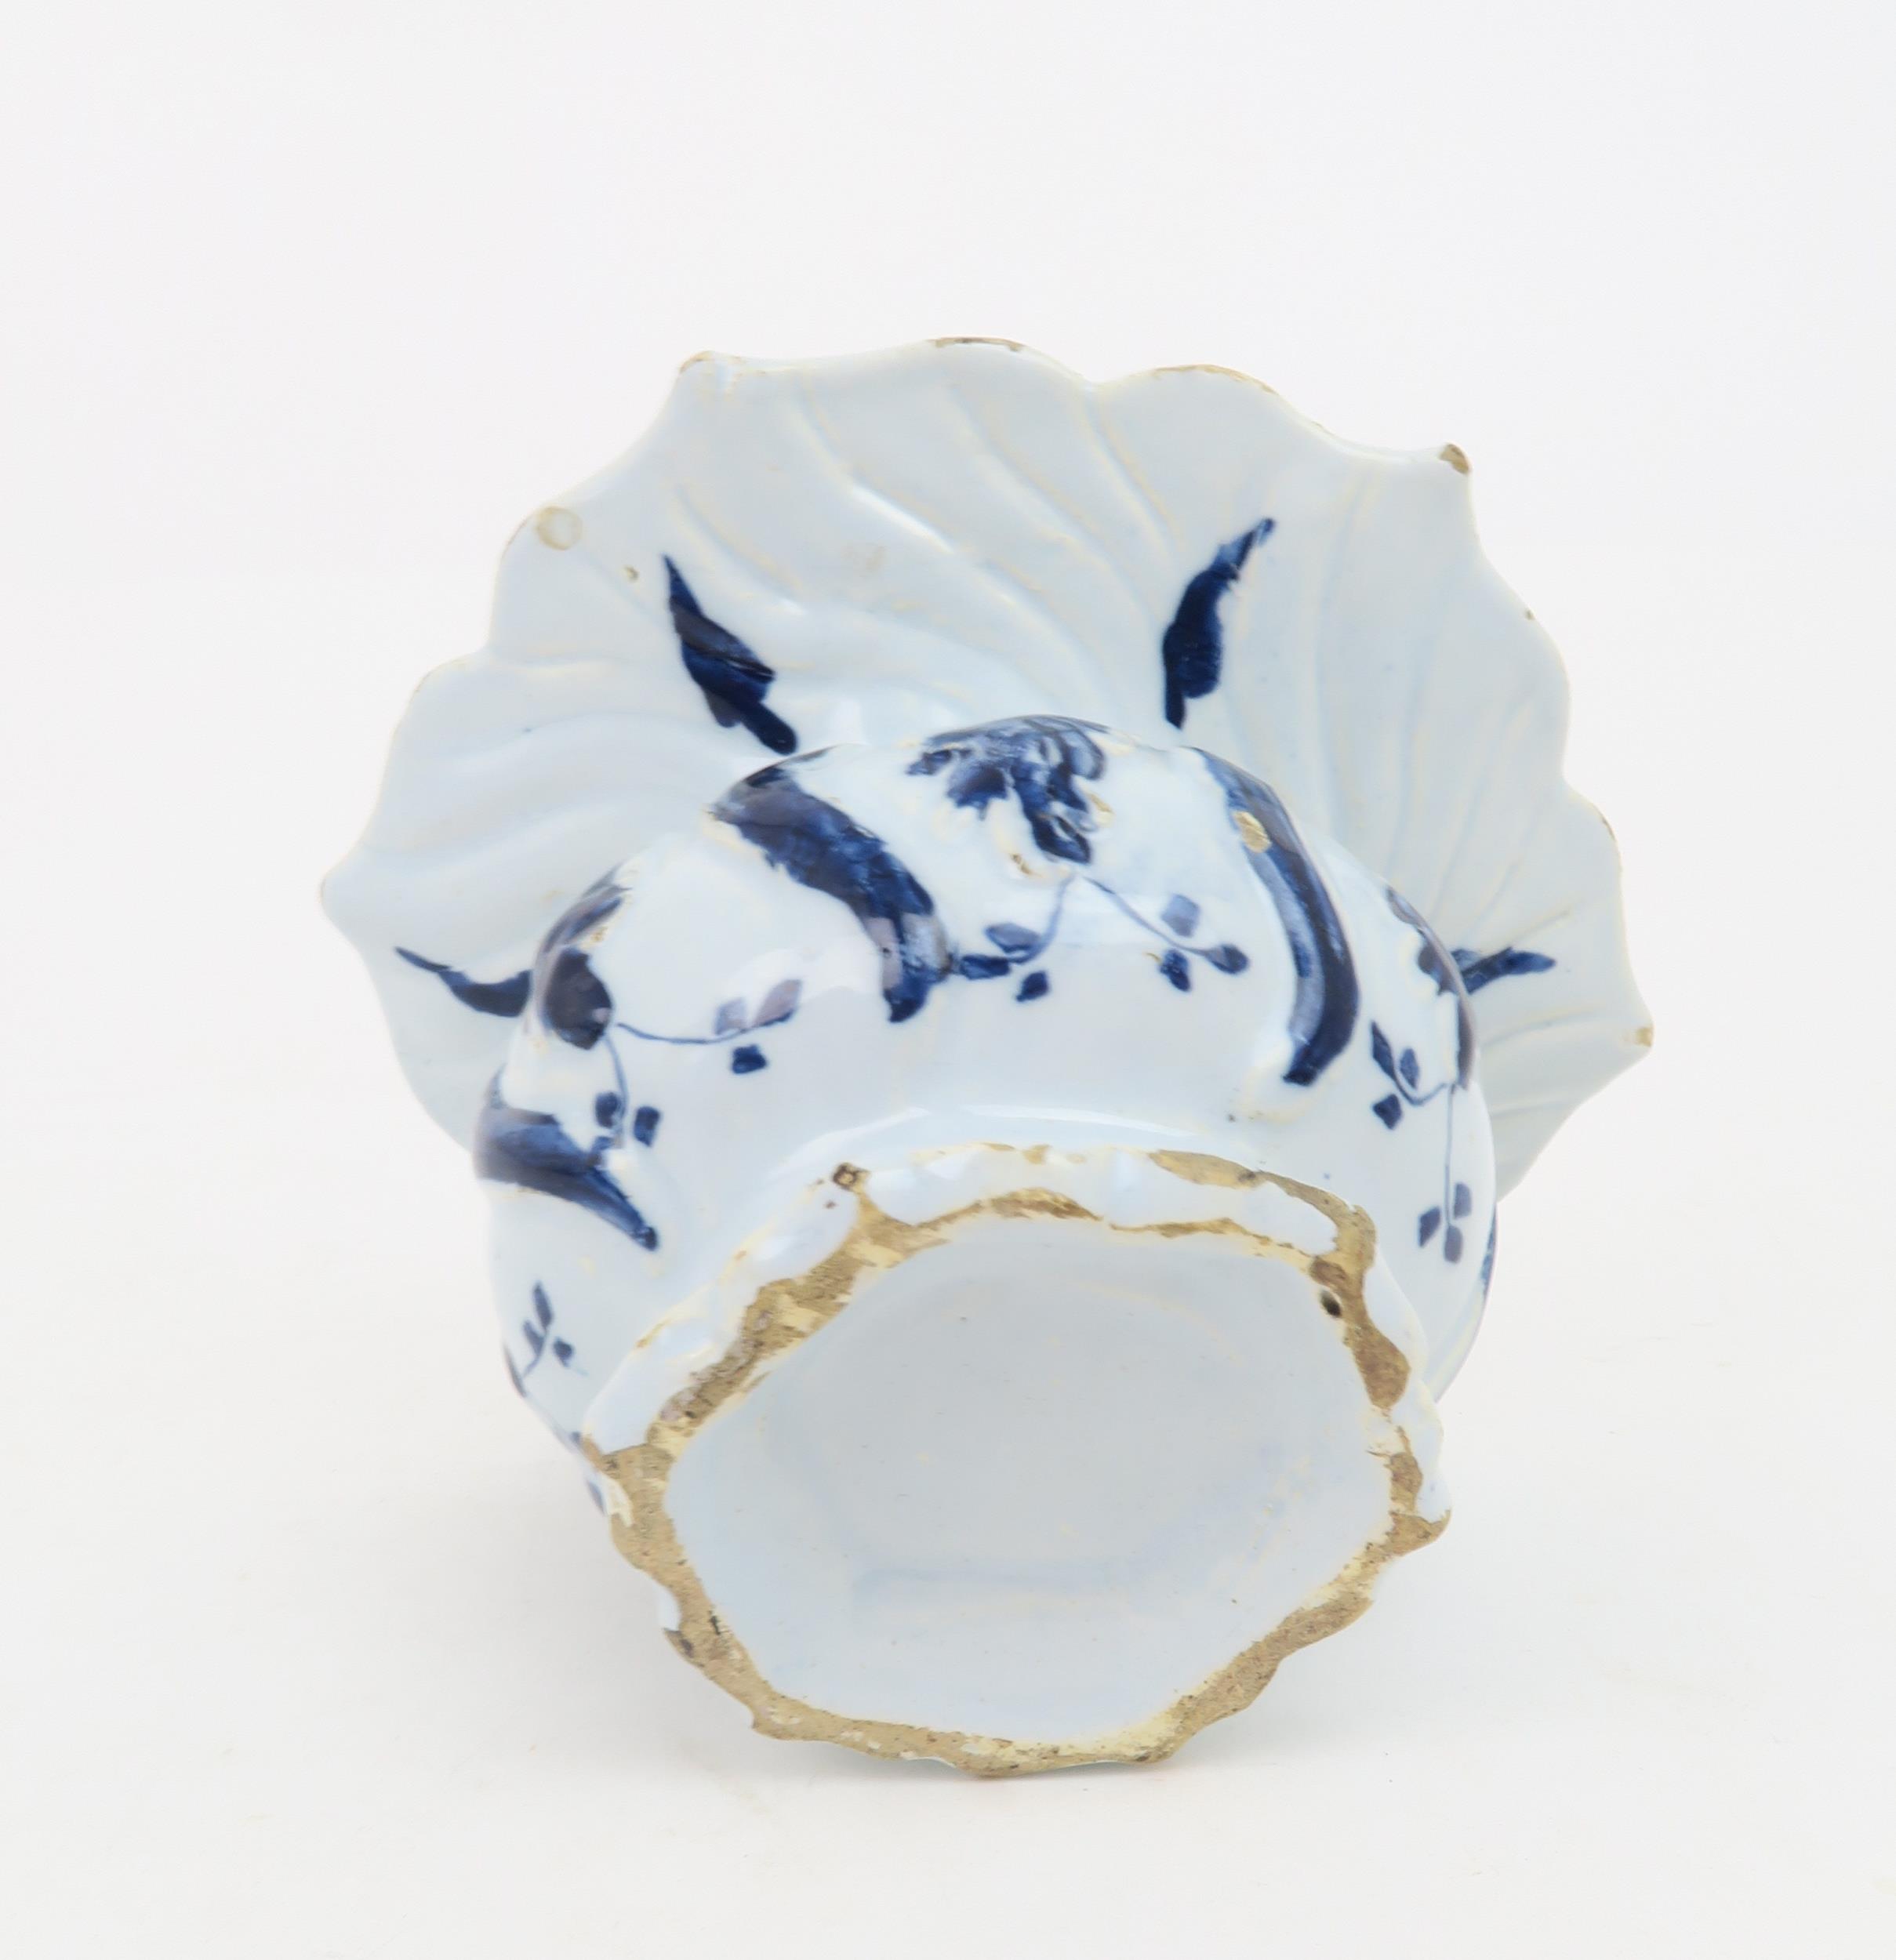 AN 18TH CENTURY DUTCH DELFT SPITTOON with flared scalloped edge, painted with sprigs of flowers, - Image 5 of 6